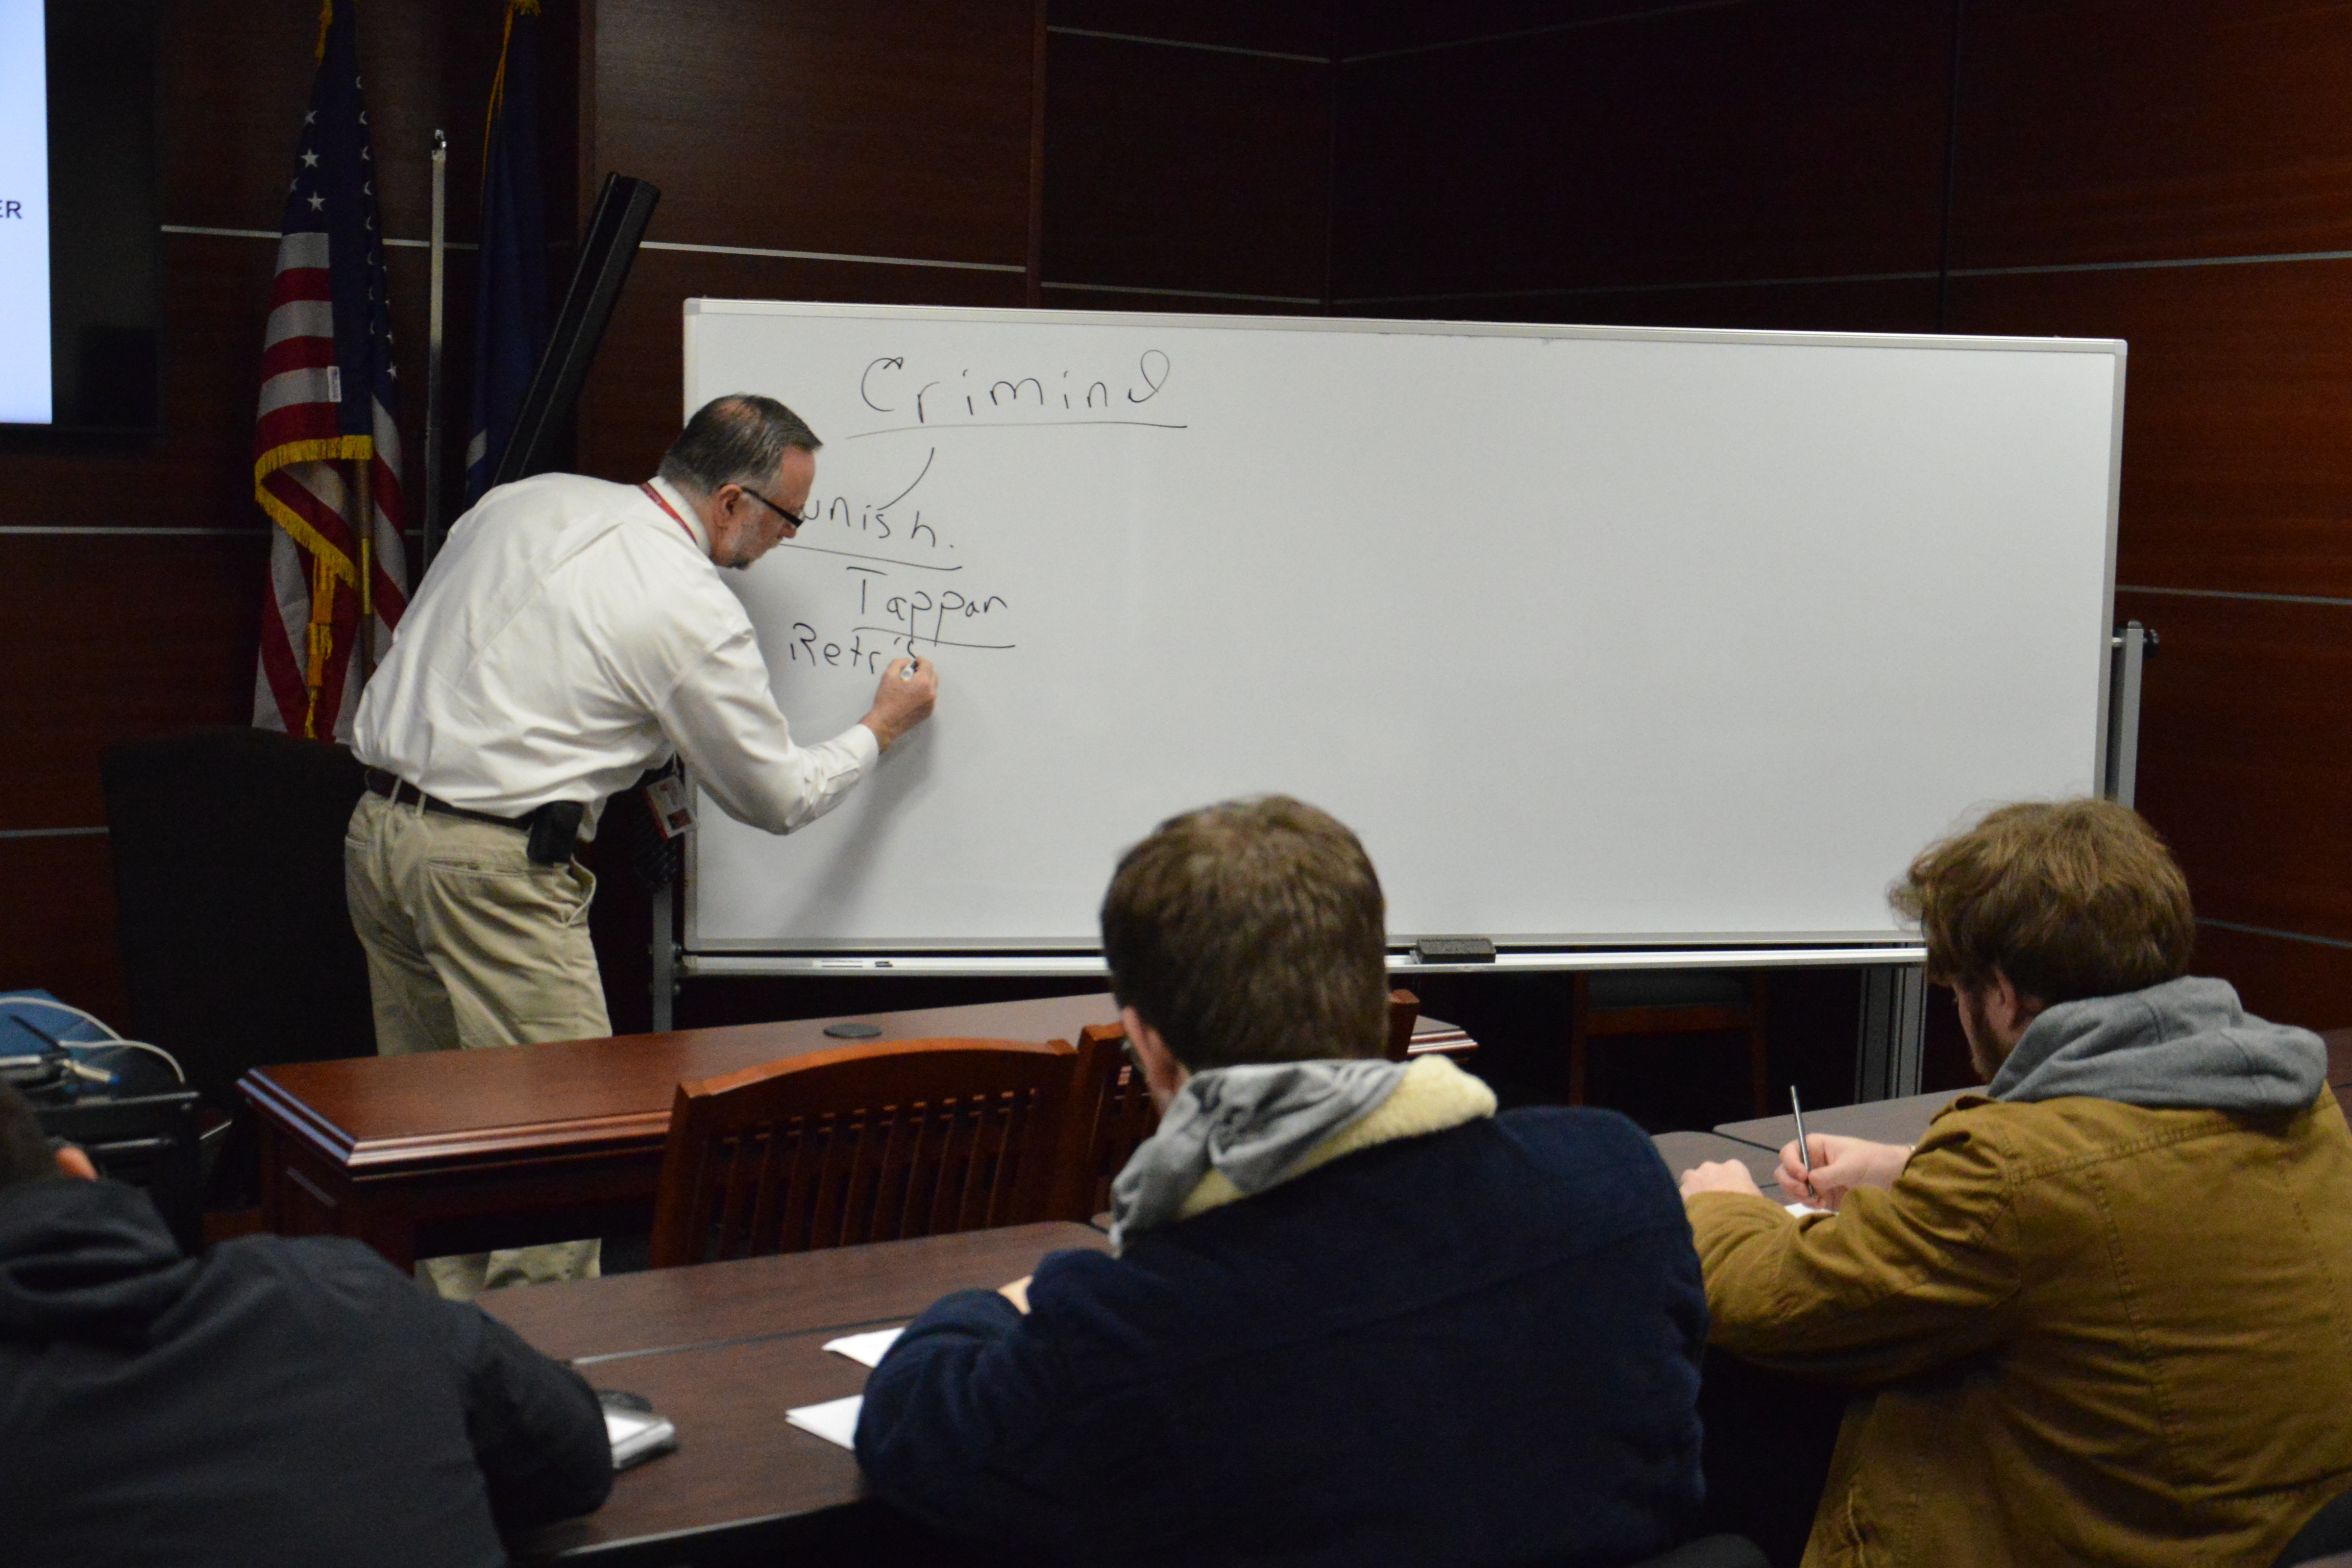 Professor writes on whiteboard for students in Molloy University's Criminal Justice department